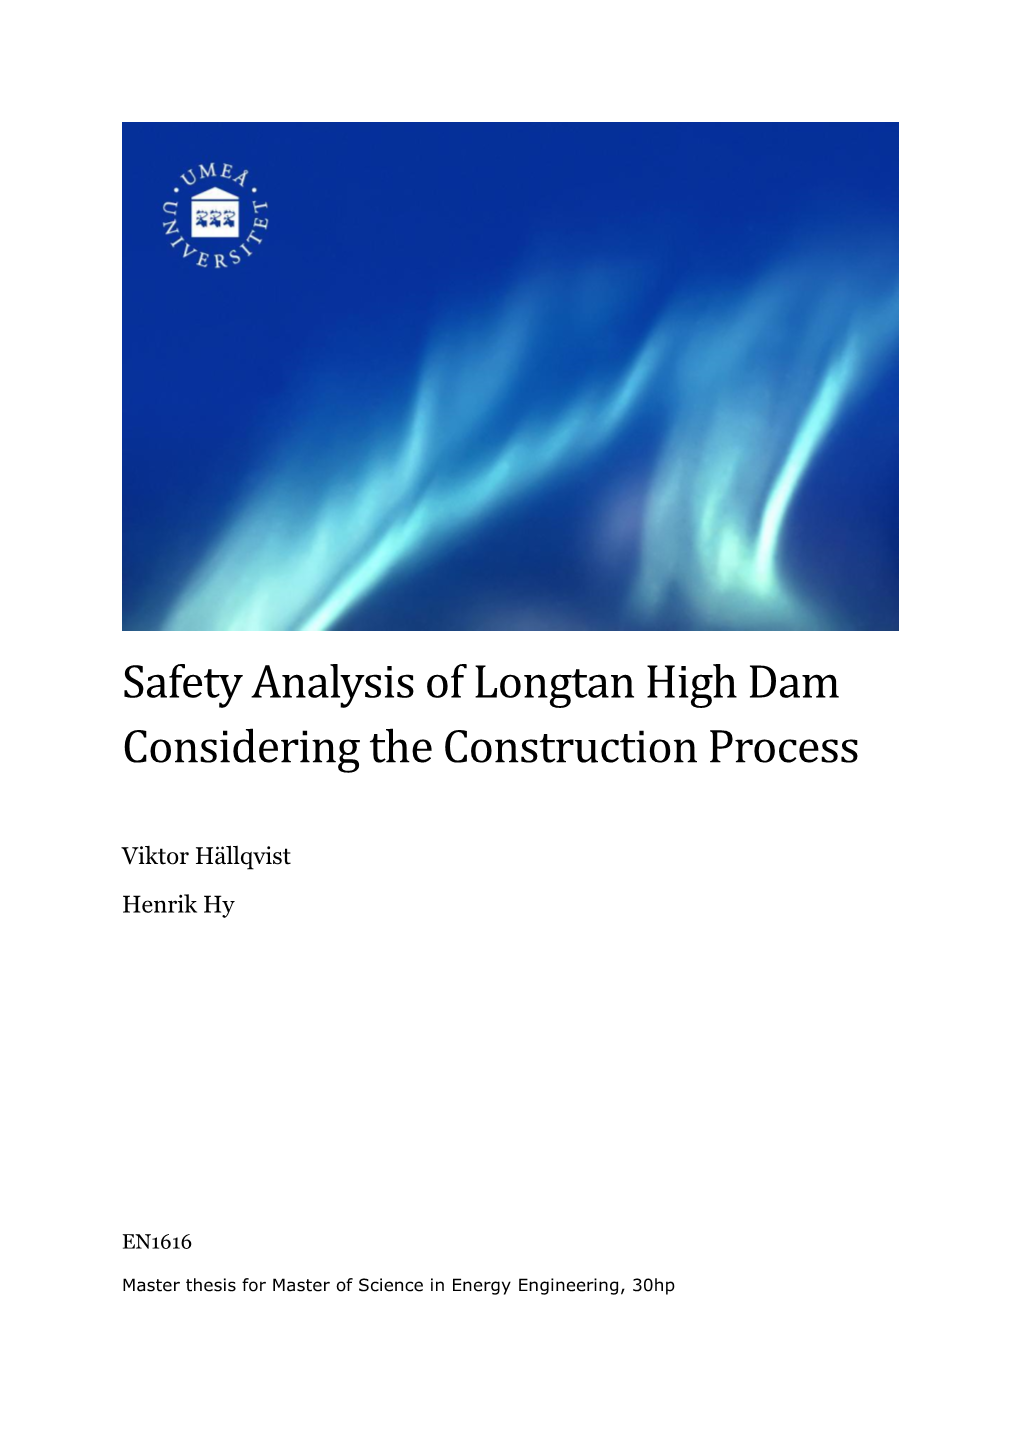 Safety Analysis of Longtan High Dam Considering the Construction Process